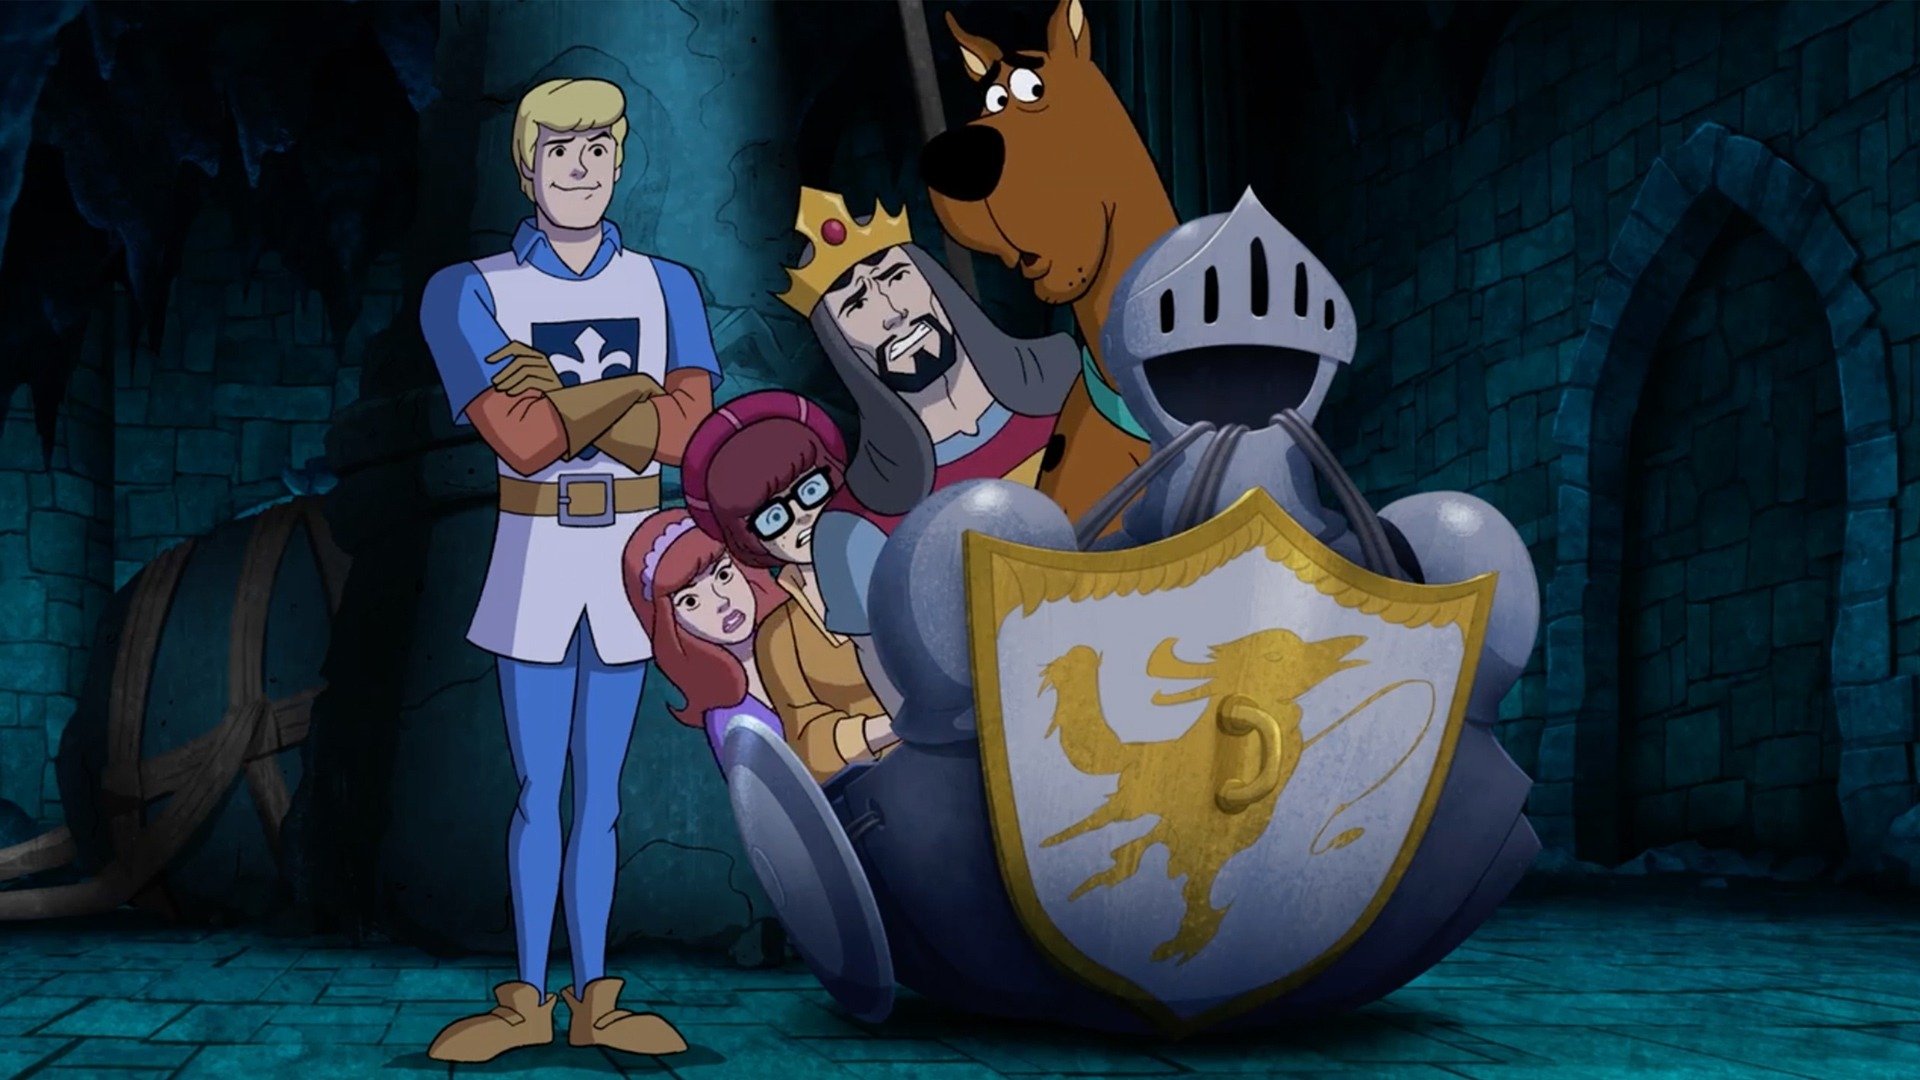 Scooby-Doo! The Sword and the Scoob Ending Explained [SPOILER!]